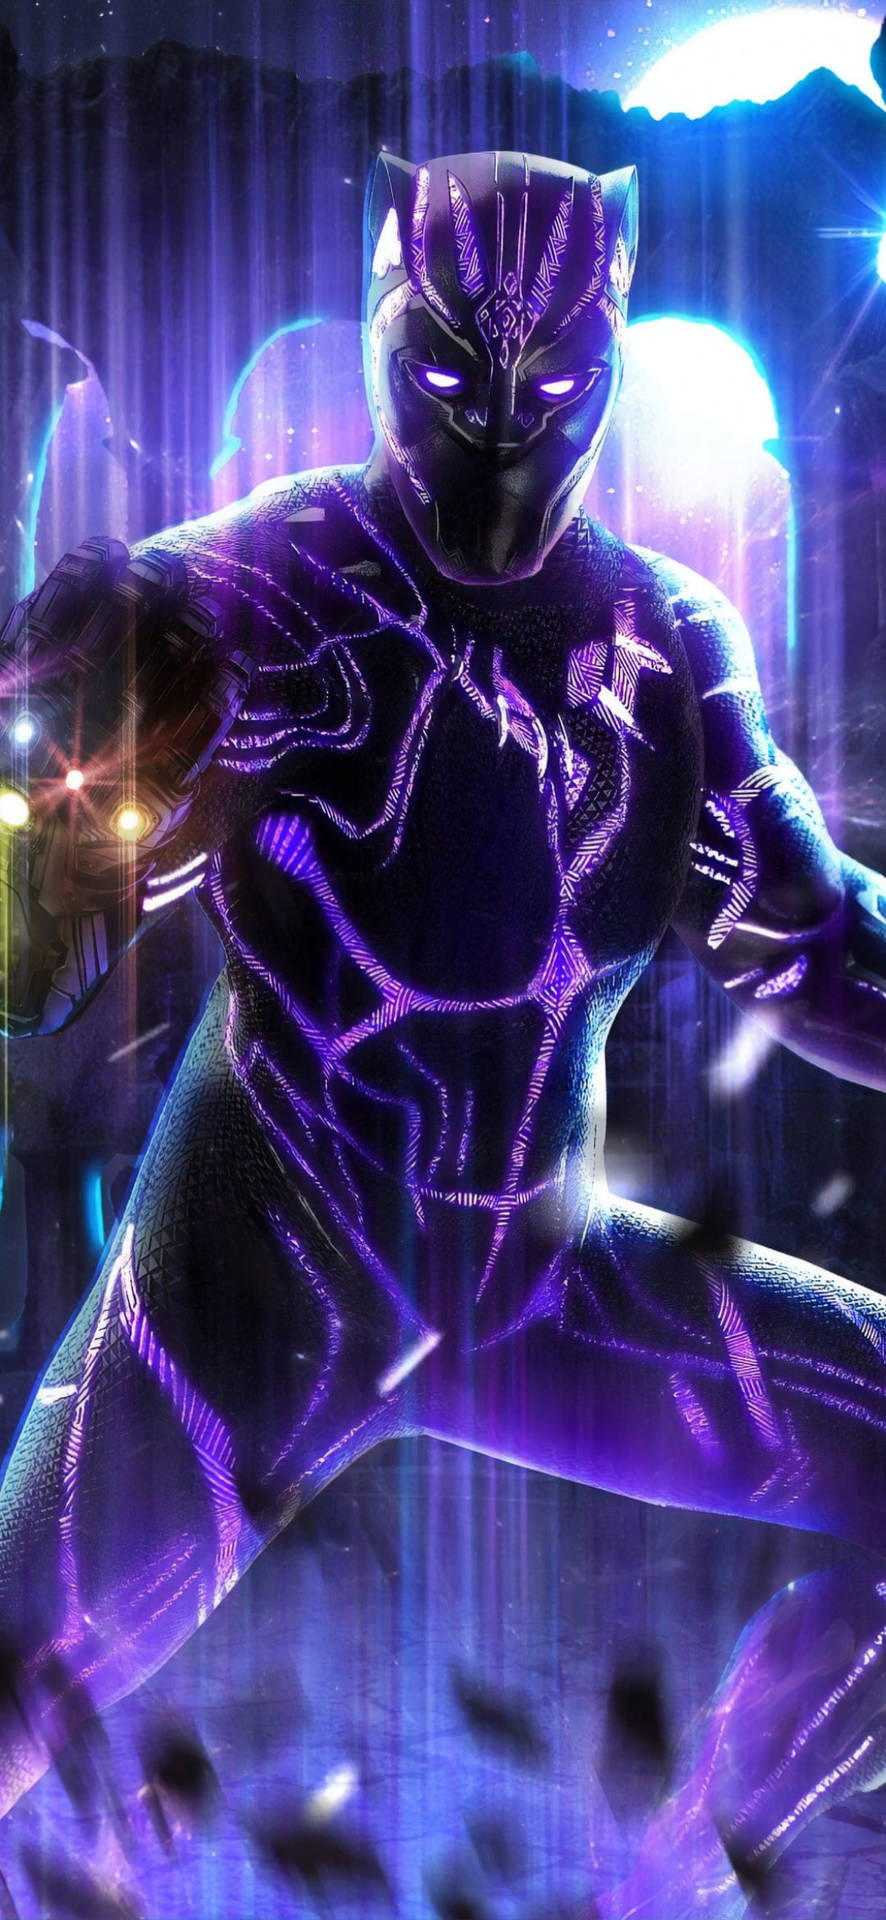 Infinity Gauntlet Black Panther Android Background